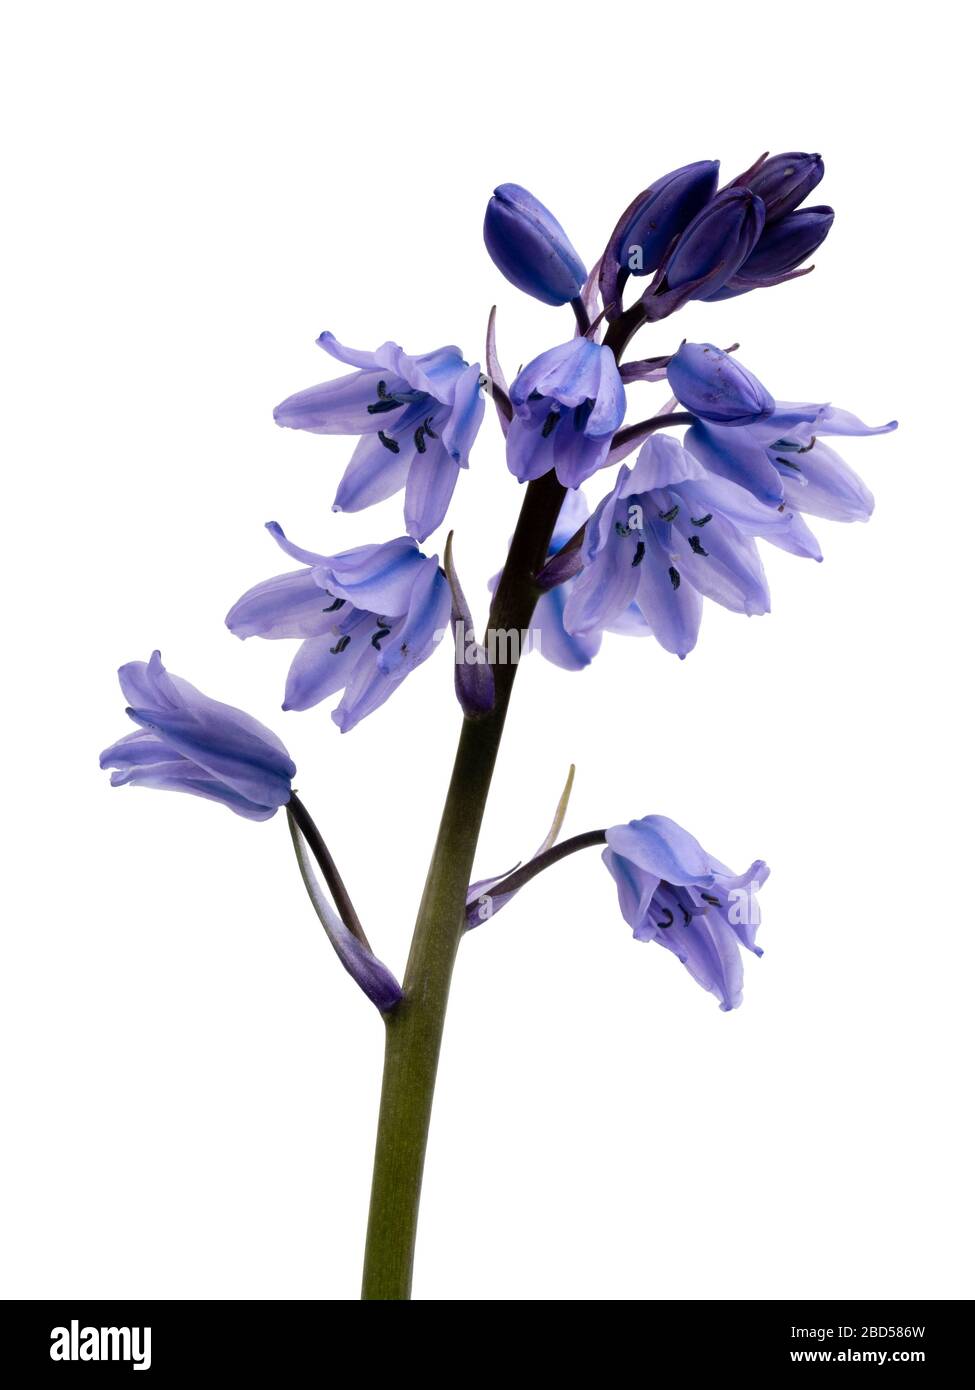 Blue anthered white and blue striped spring flowers of the Spanish bluebell, Hyacinthoides hispanica, on a white background Stock Photo